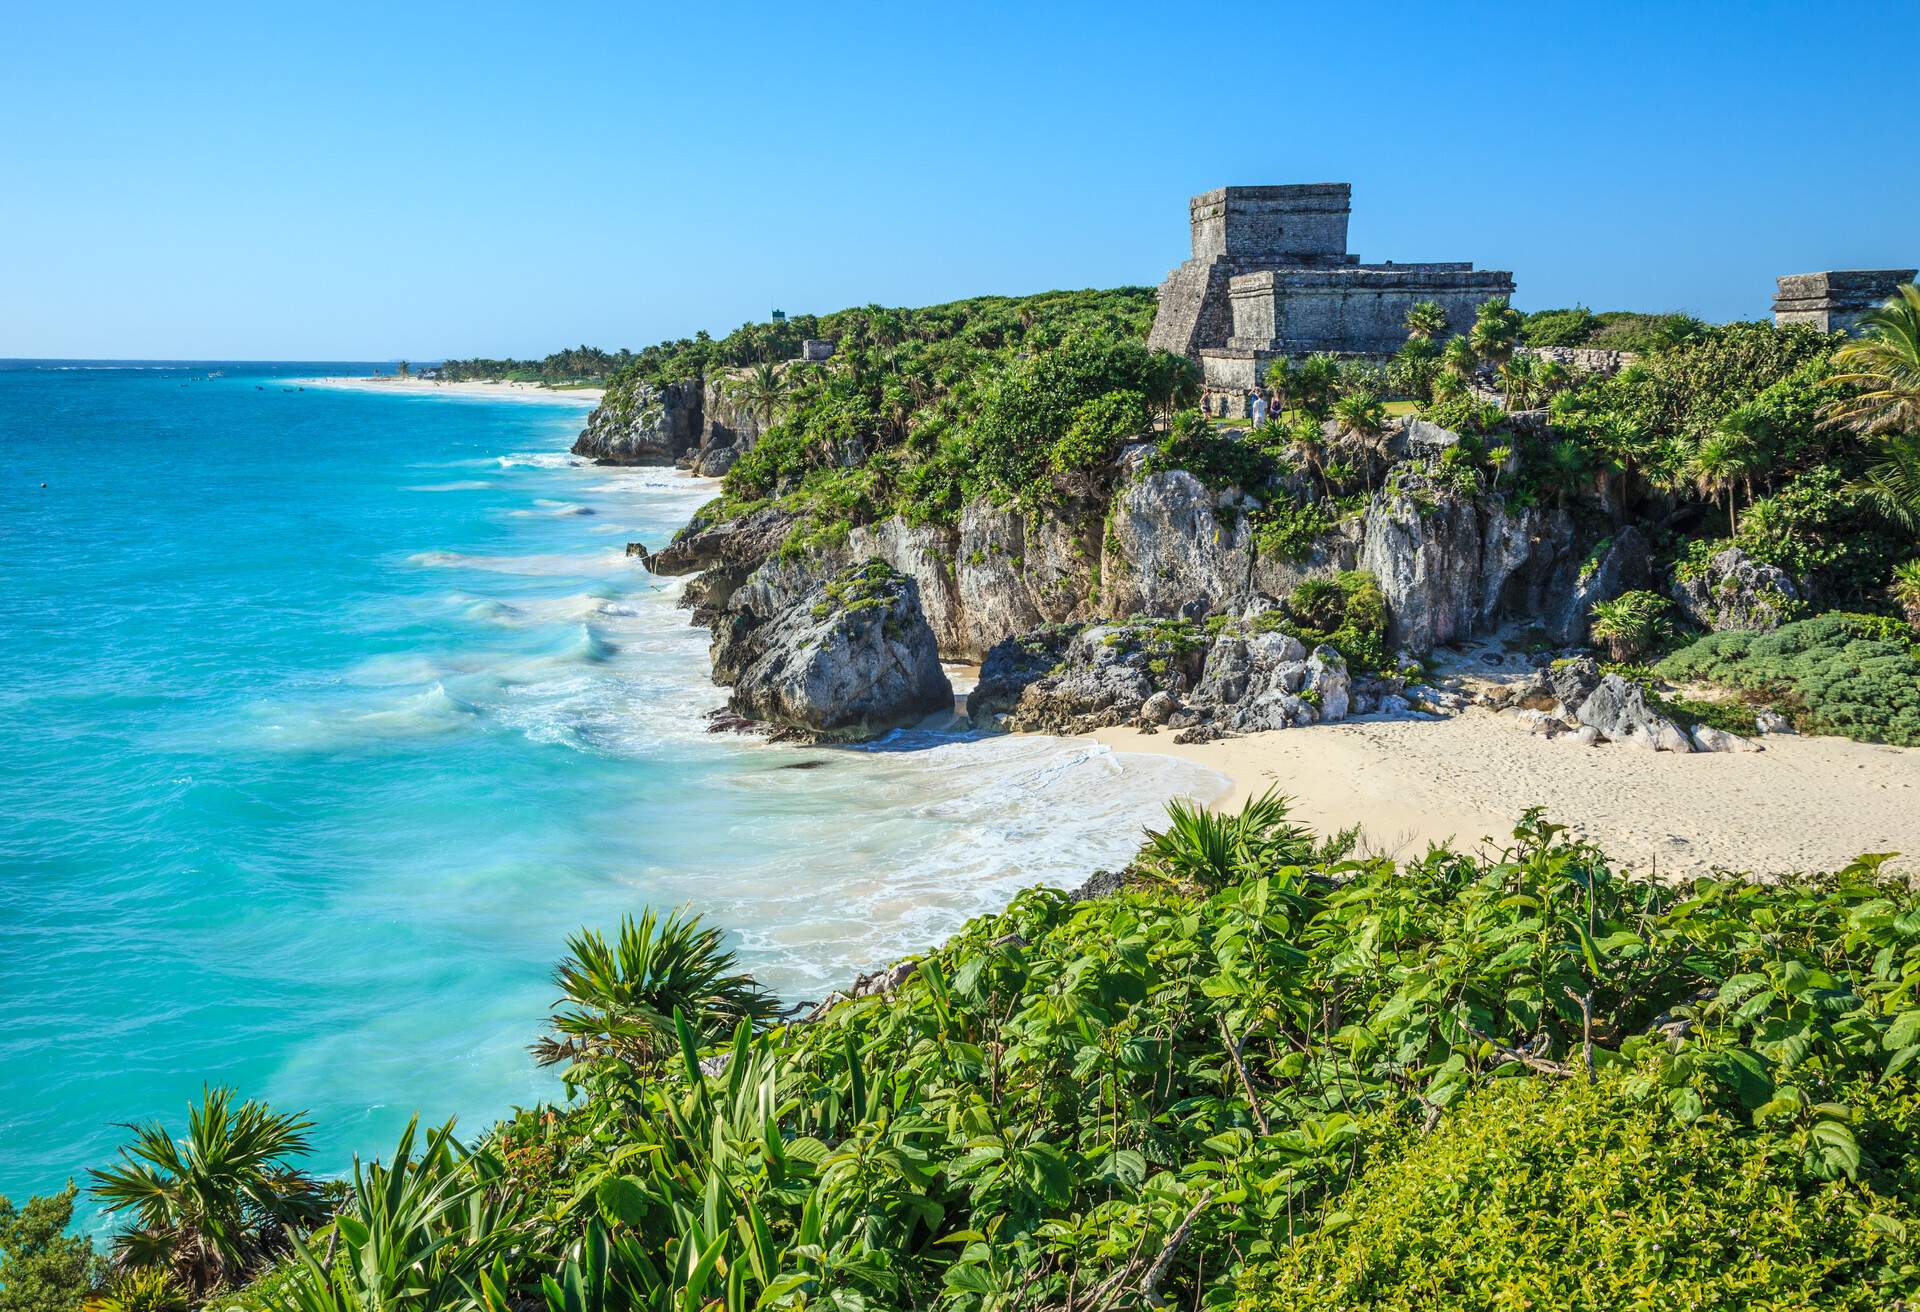 DEST_MEXICO_QUINTANA ROO_TULUM_MAYAN RUINS_GettyImages-972523936